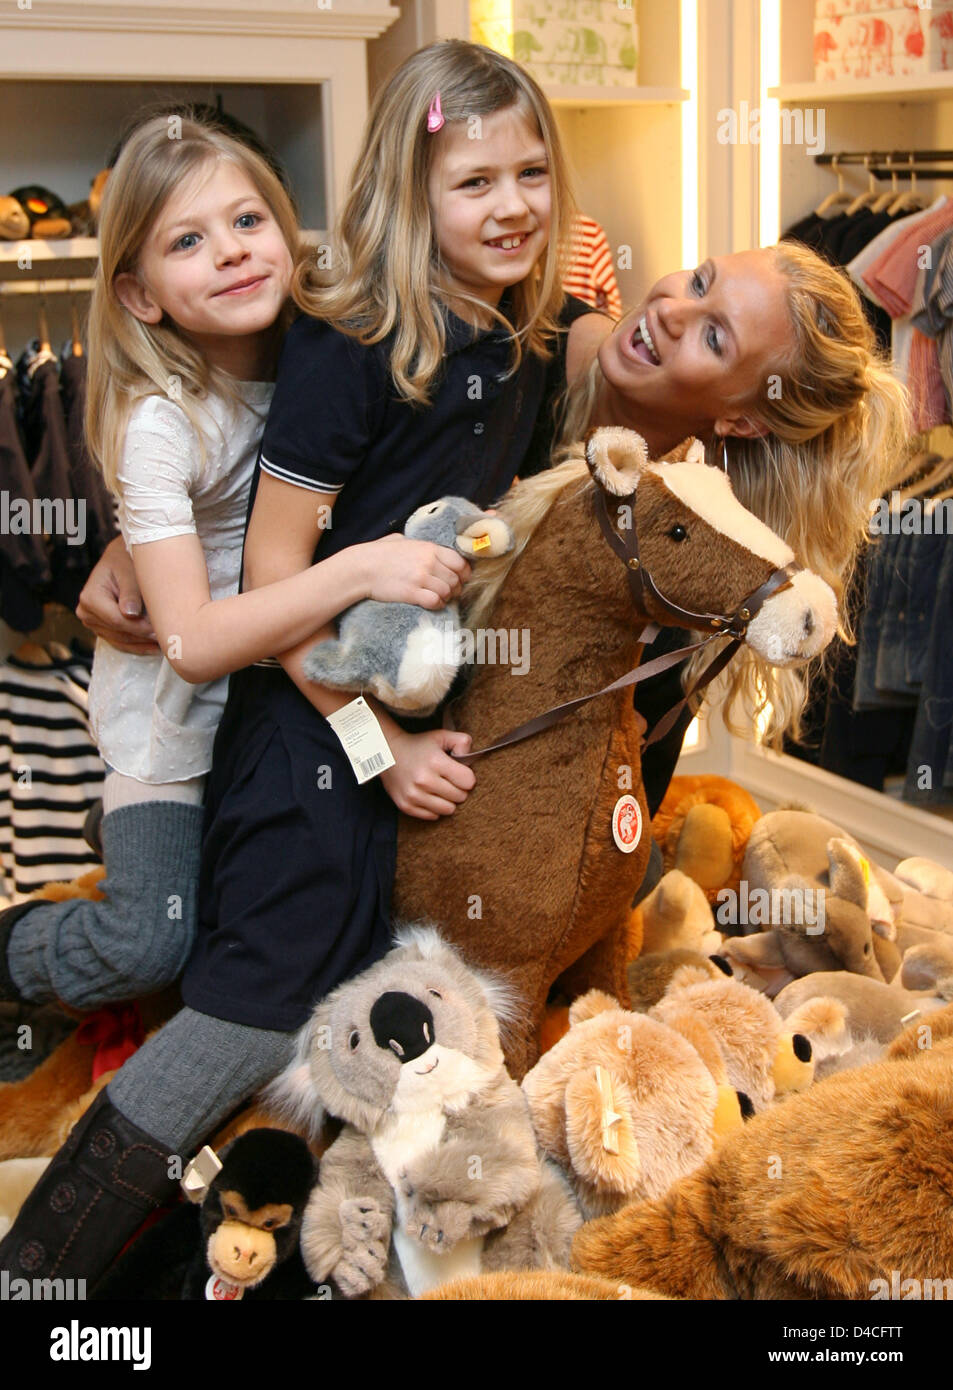 German former gymnast Magdalena Brzeska (R) poses with her daughters Caprice  (C) and Noemi (L) at a new-opened Steiff store in Stuttgart, Germany, 29  January 2008. Brzeska has won numerous titles in